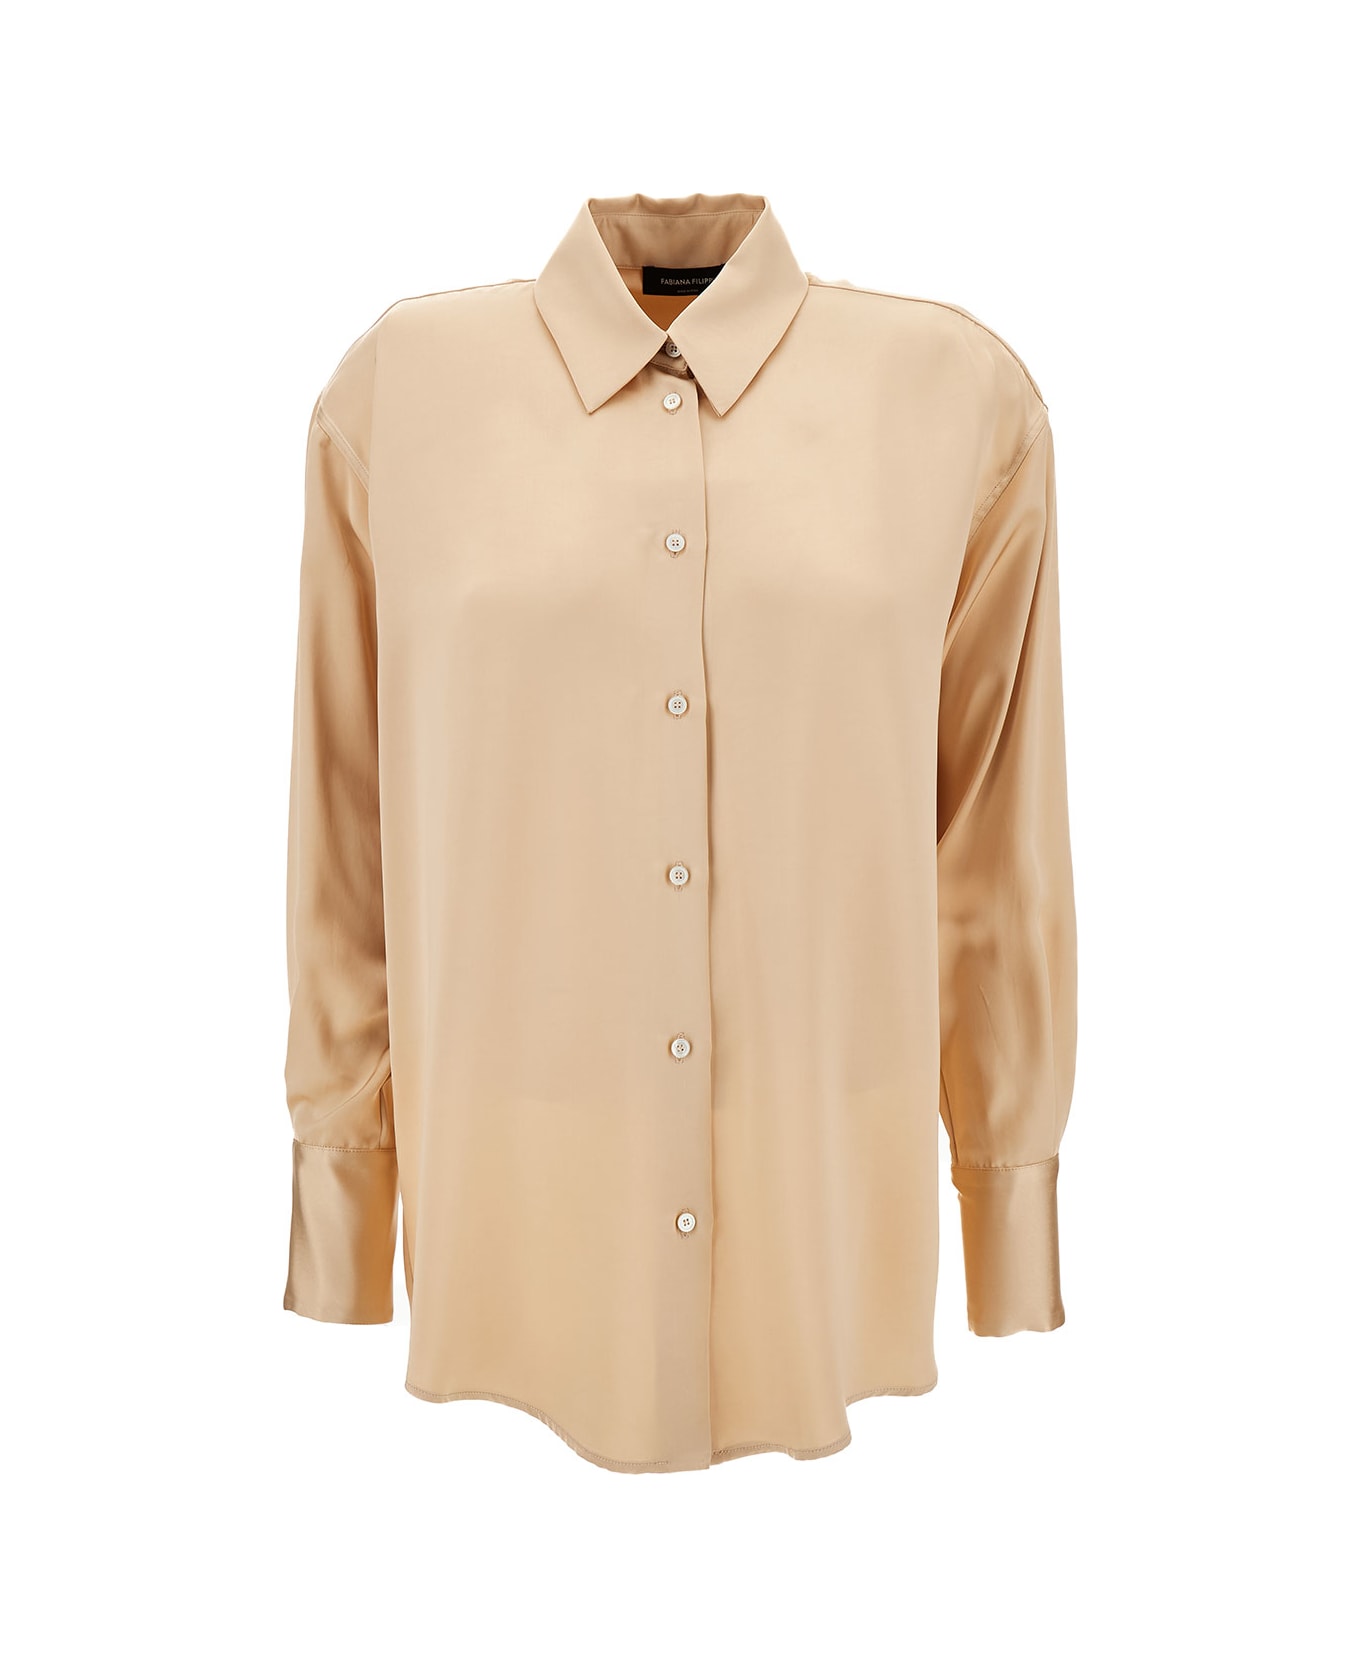 Fabiana Filippi Champagne Loose Shirt With Long Sleeve In Satin Fabric Woman - Beige シャツ